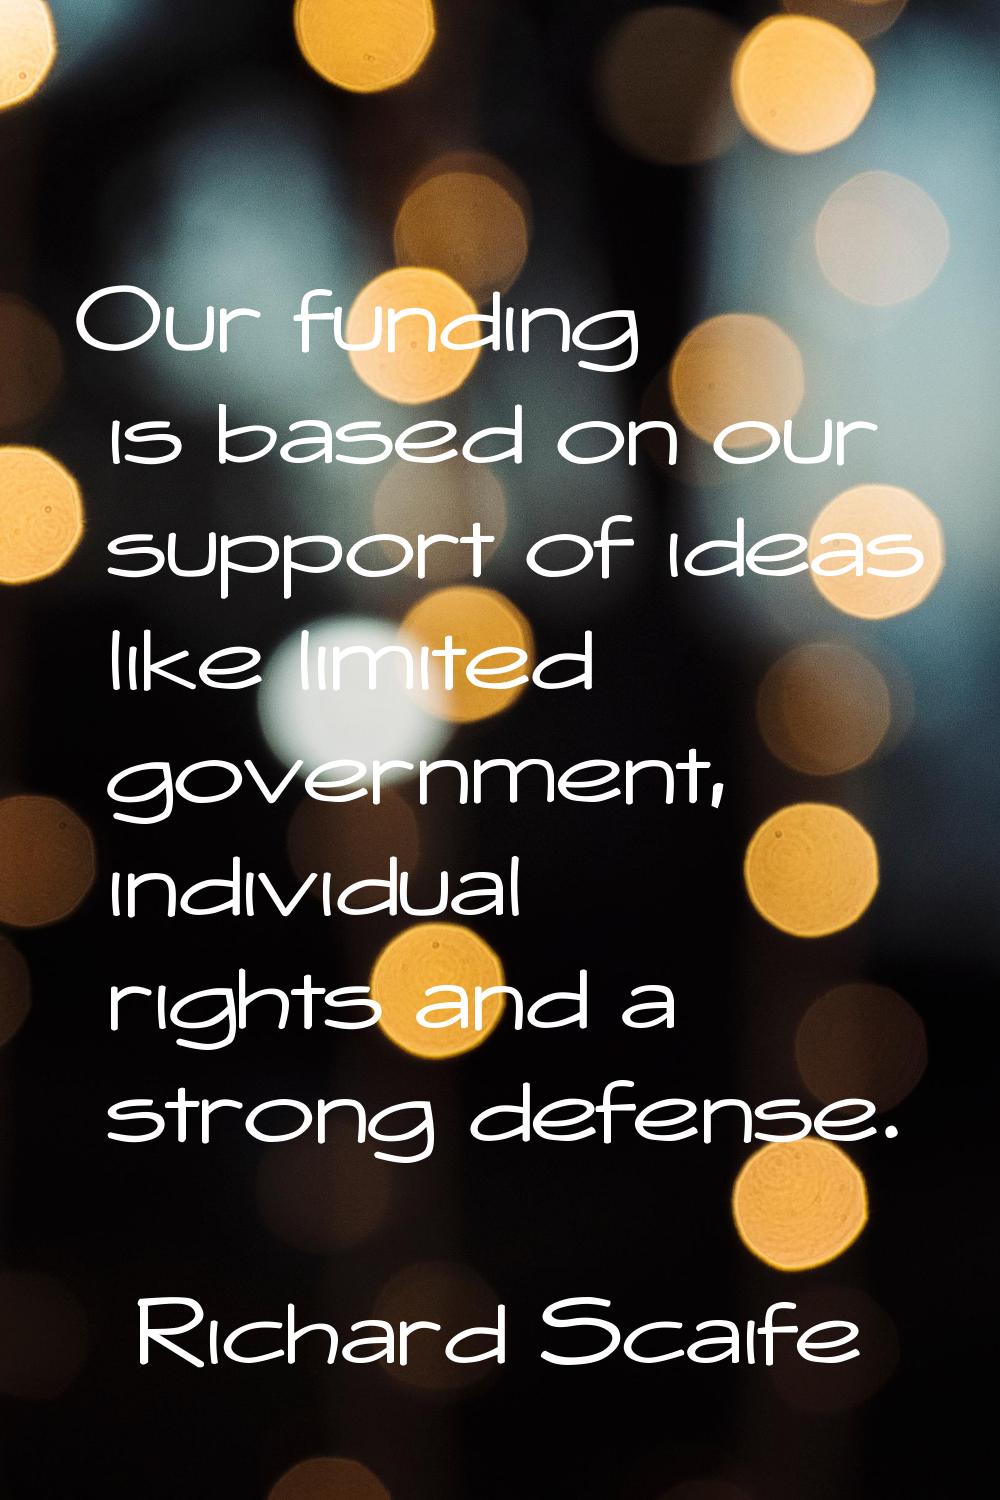 Our funding is based on our support of ideas like limited government, individual rights and a stron